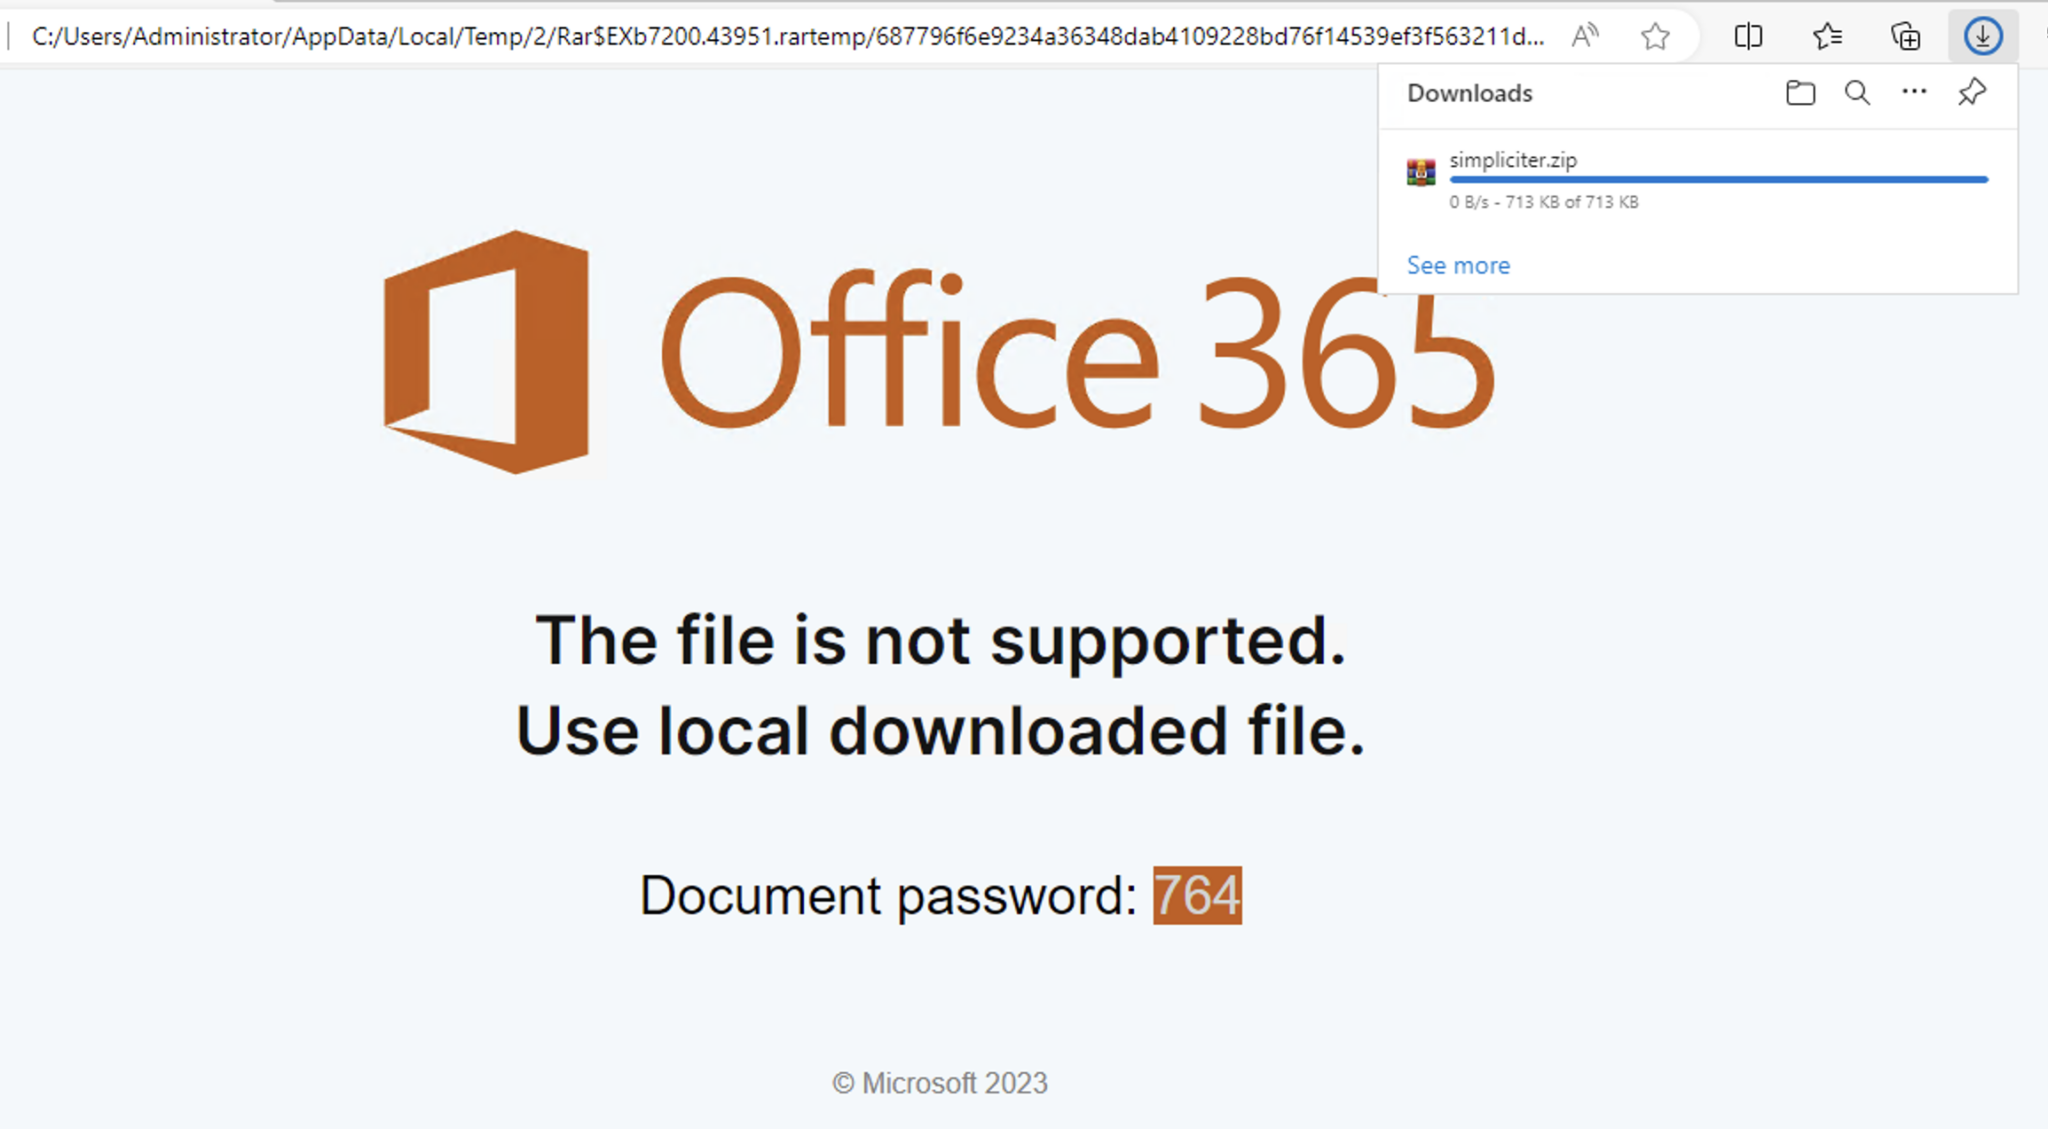 Payload Masquerading as legitimate Office365 page.